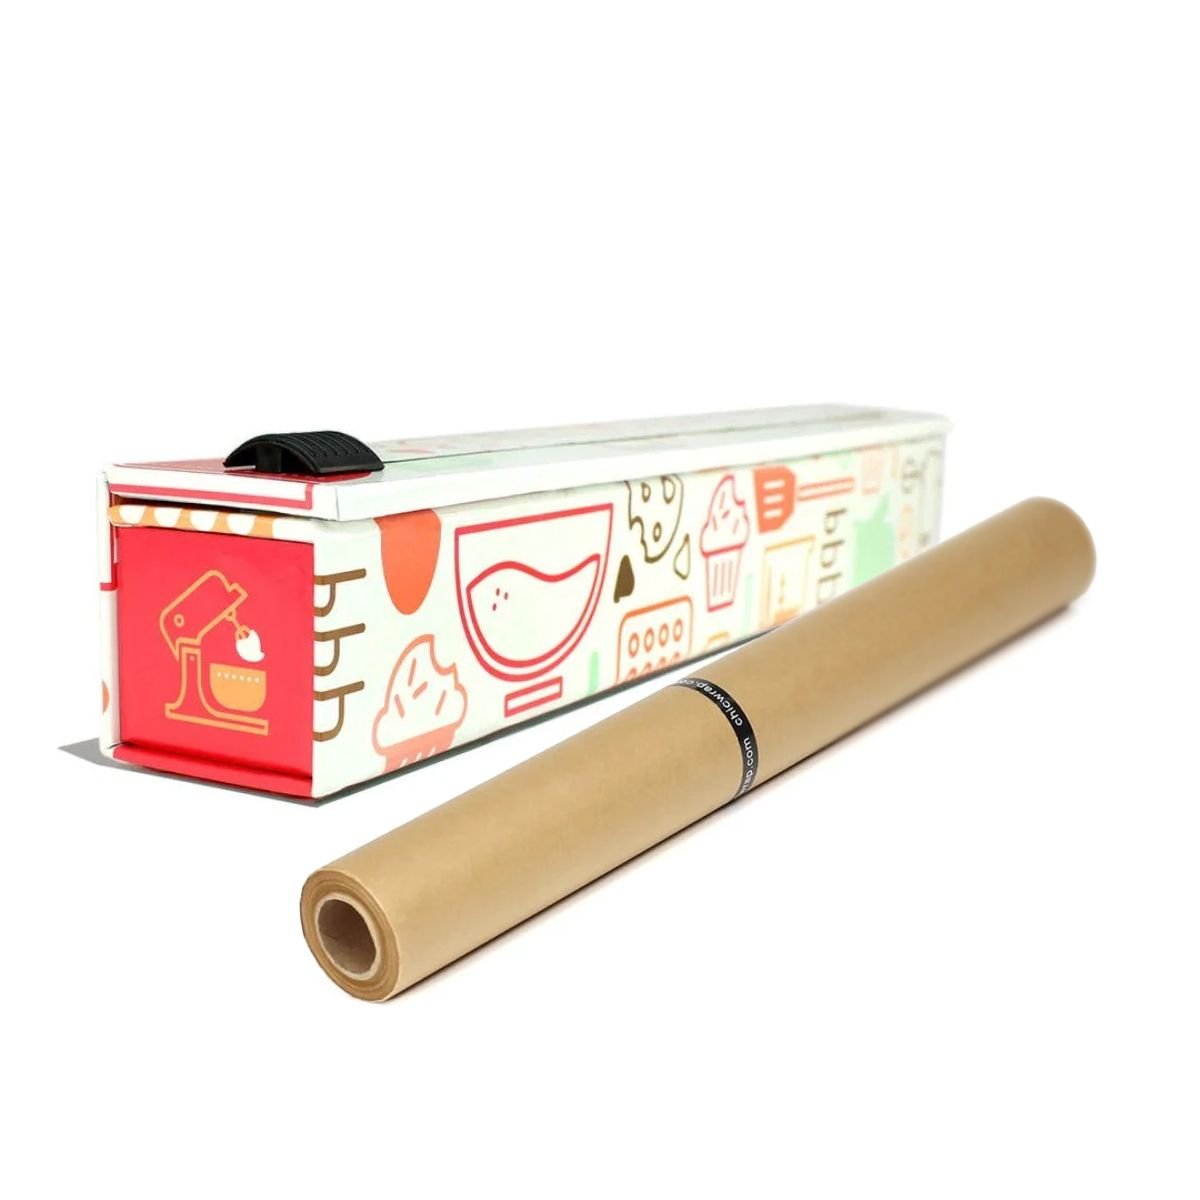 ChicWrap Parchment Paper Dispenser + Refill Roll | Baker's Tools